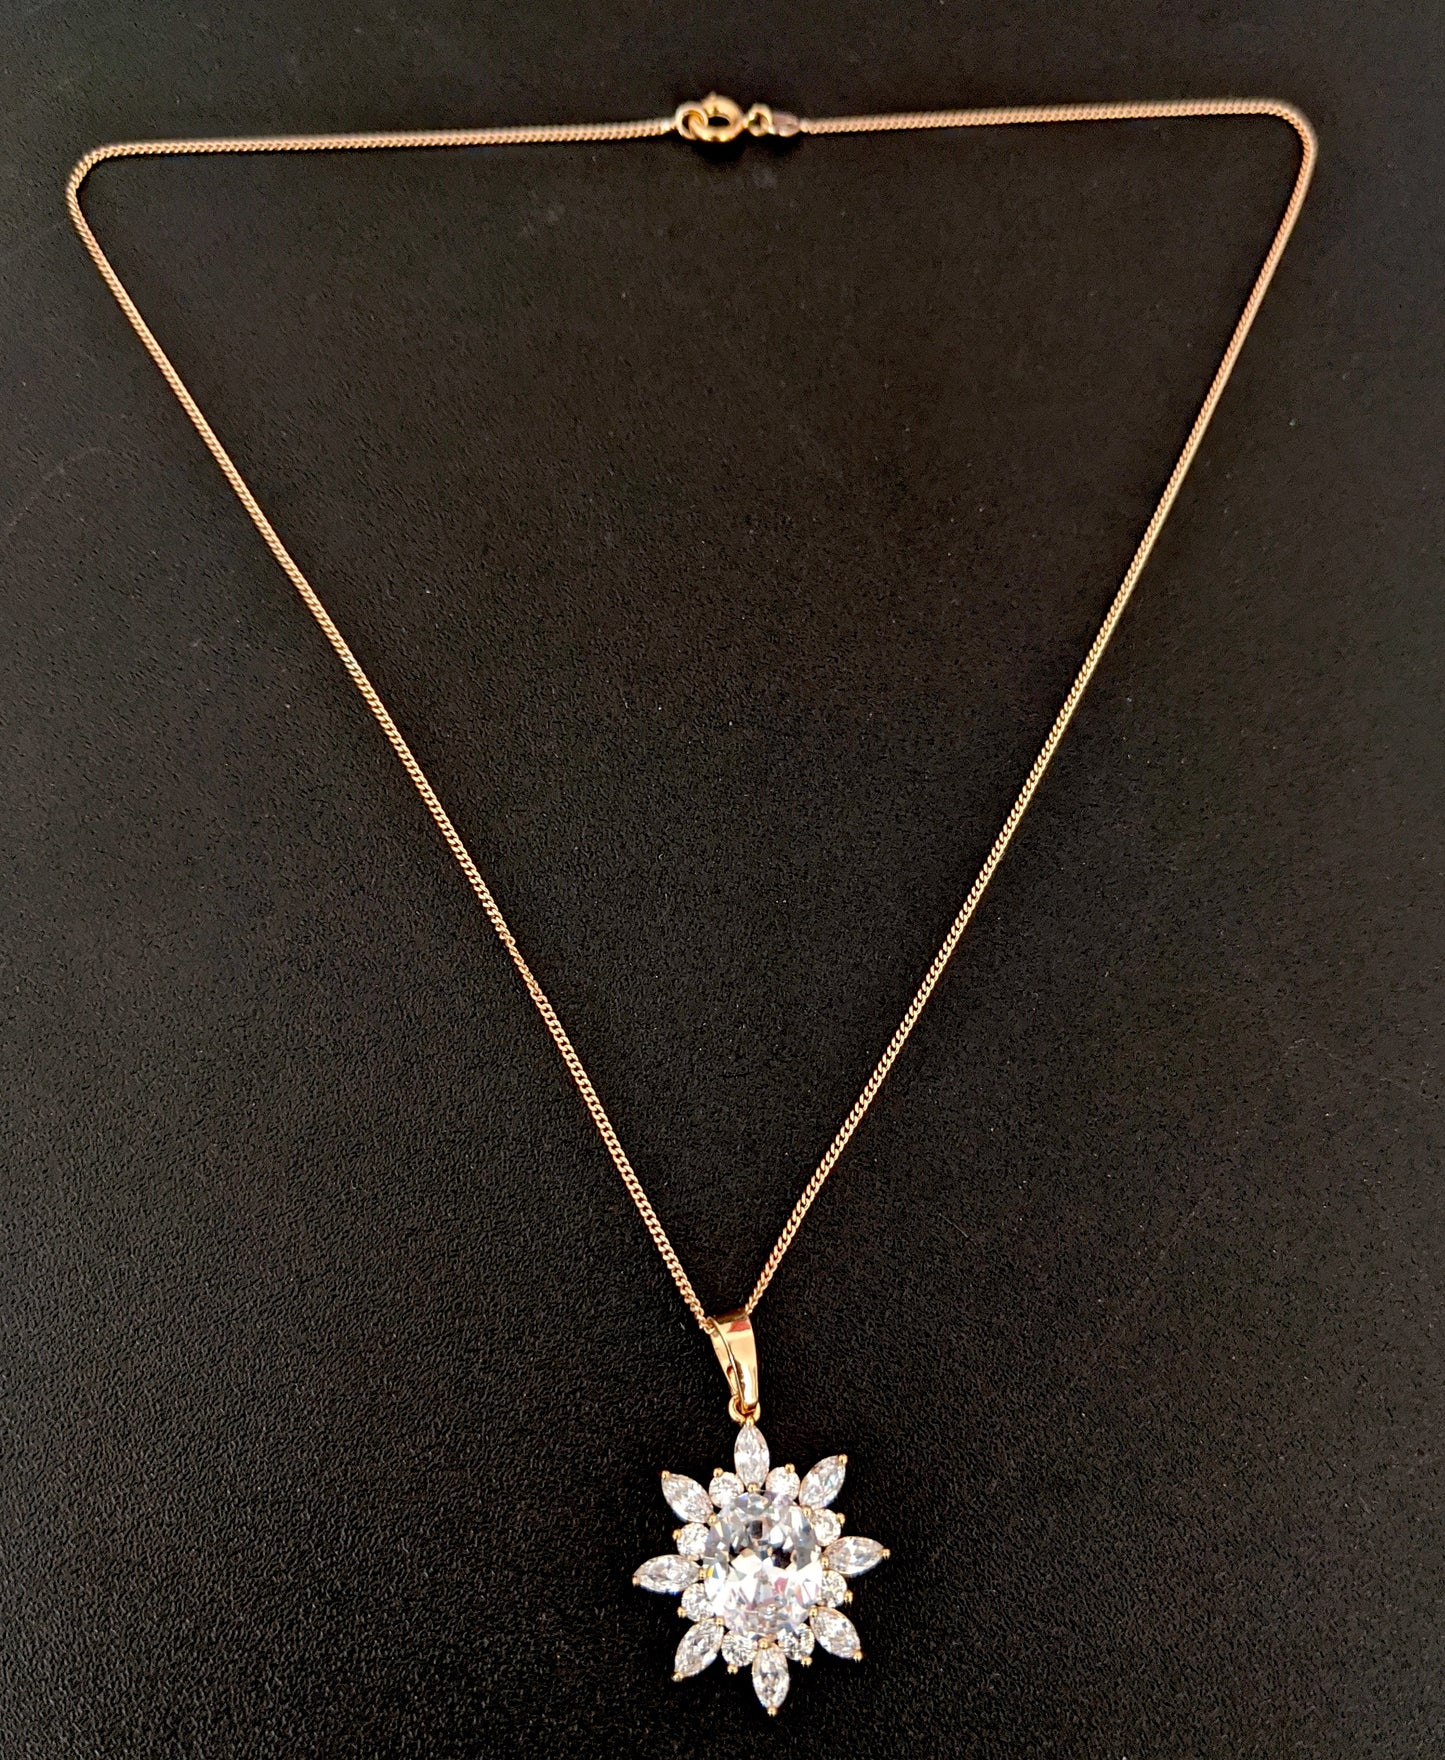 Shiny white CZ pendant with light rose gold link chain necklace - Simpliful